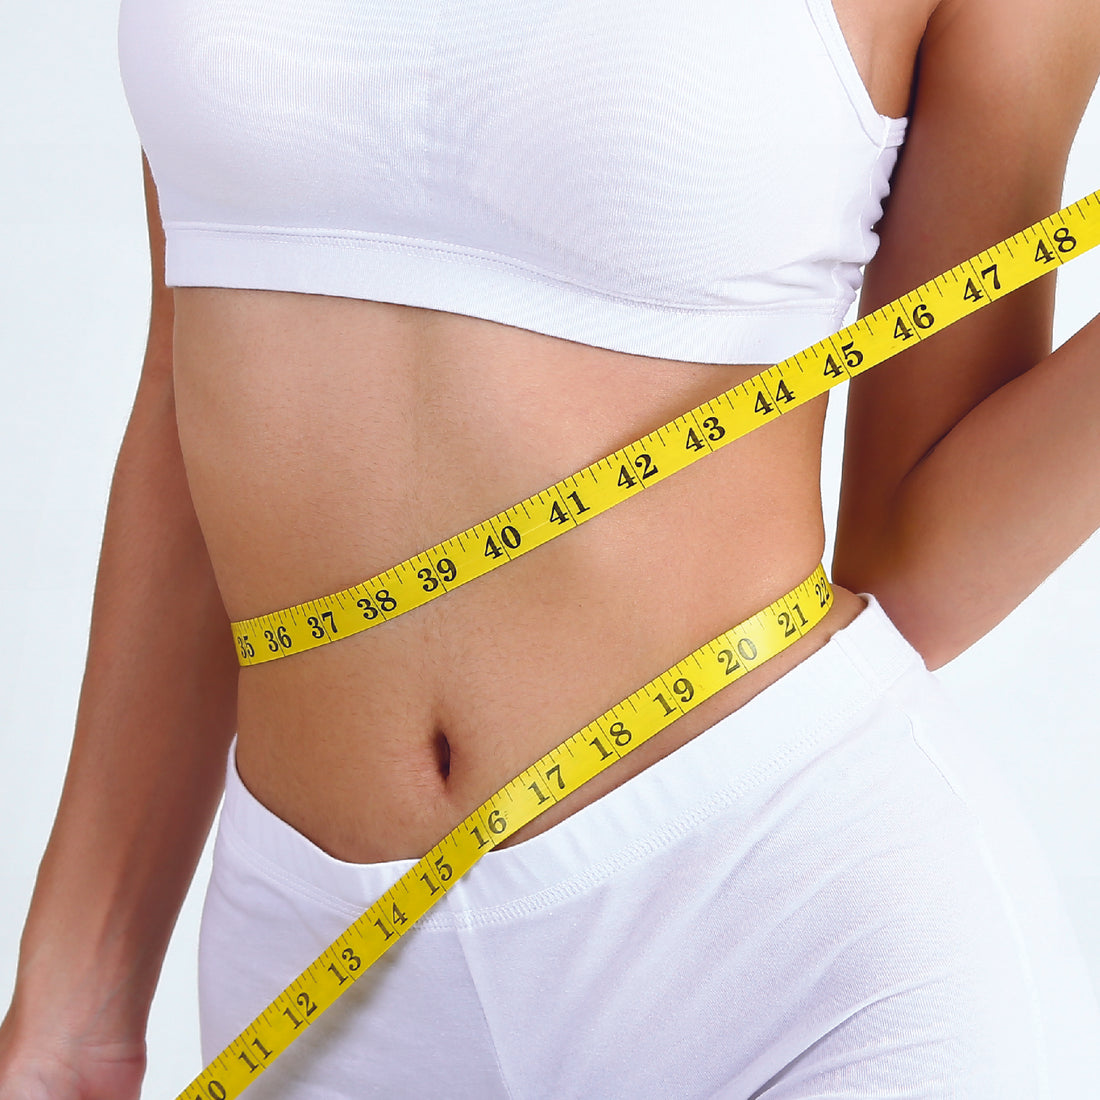 SÓL Clinic Feel Good, Slimming Package